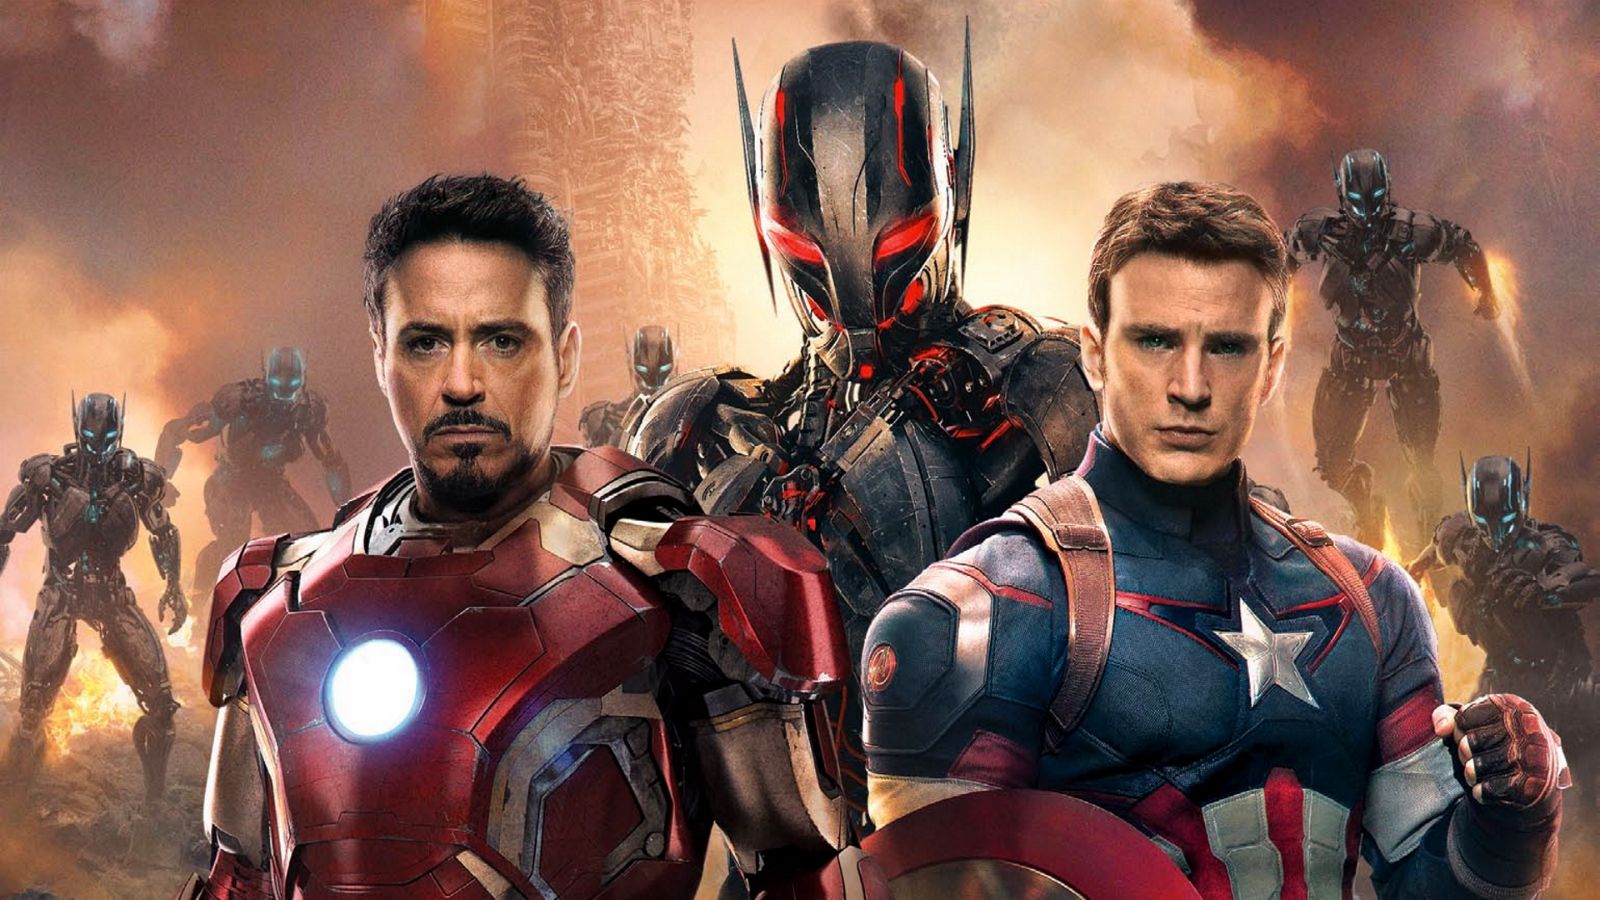 Box Office: Avengers: Age of Ultron thumps a massive 35 crore opening weekend in India